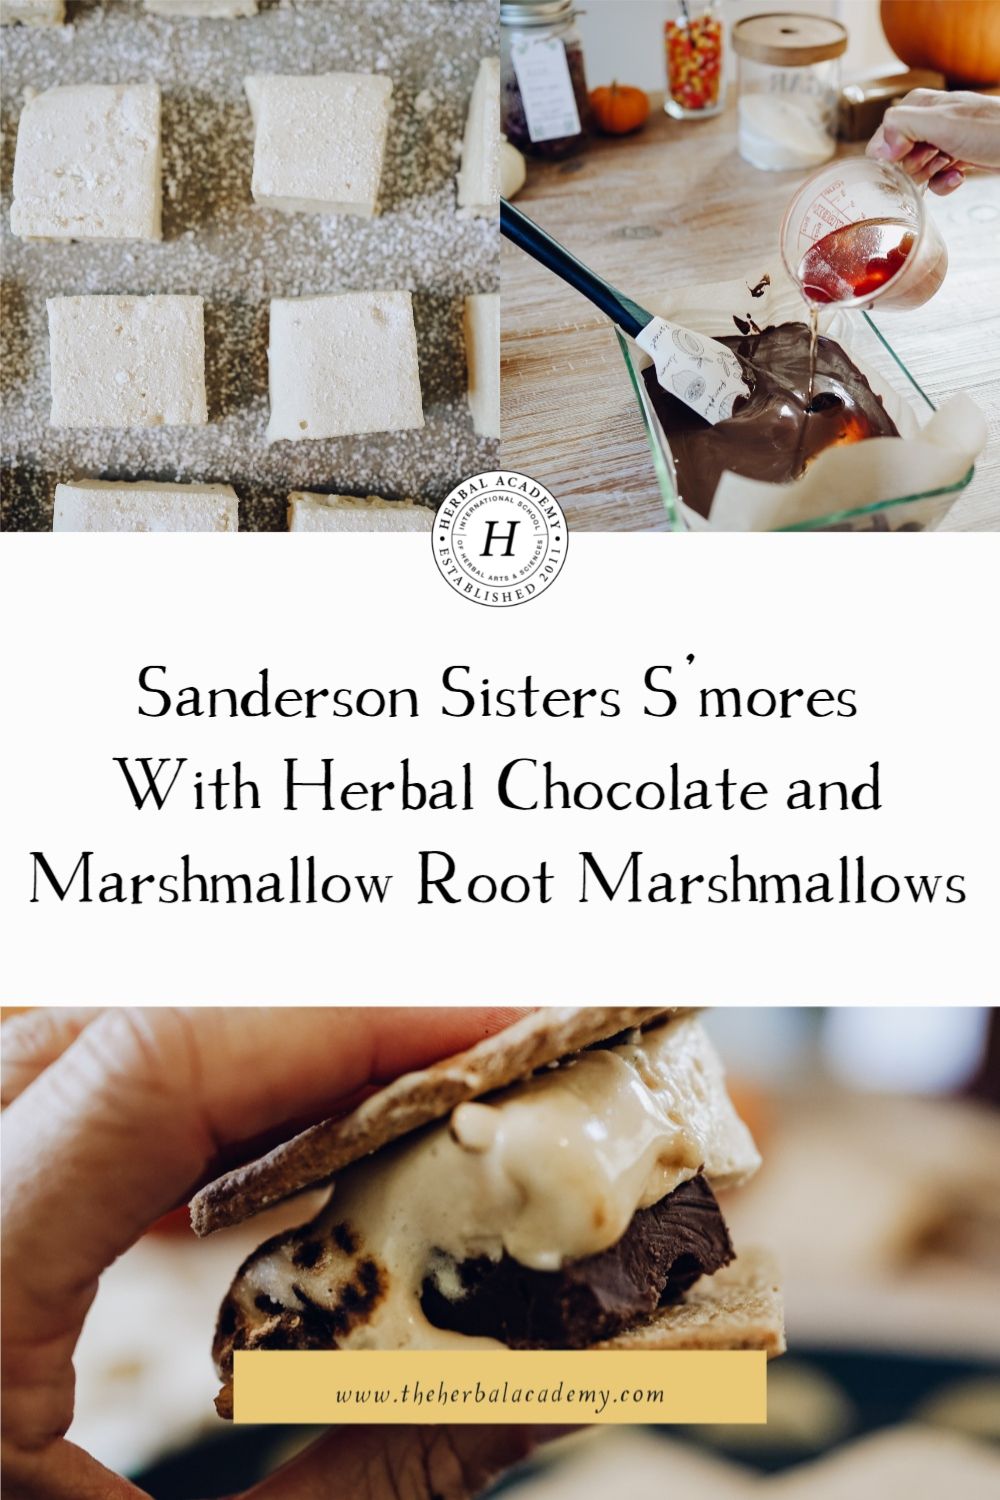 Sanderson Sisters S’mores With Herbal Chocolate and Marshmallow Root Marshmallows | Herbal Academy | Pair your tradition of watching Hocus Pocus with these easy-to-make Sanderson Sisters S’mores. The pillowy texture, sweet herbal flavors, and unique ingredients take s’mores to the next level!